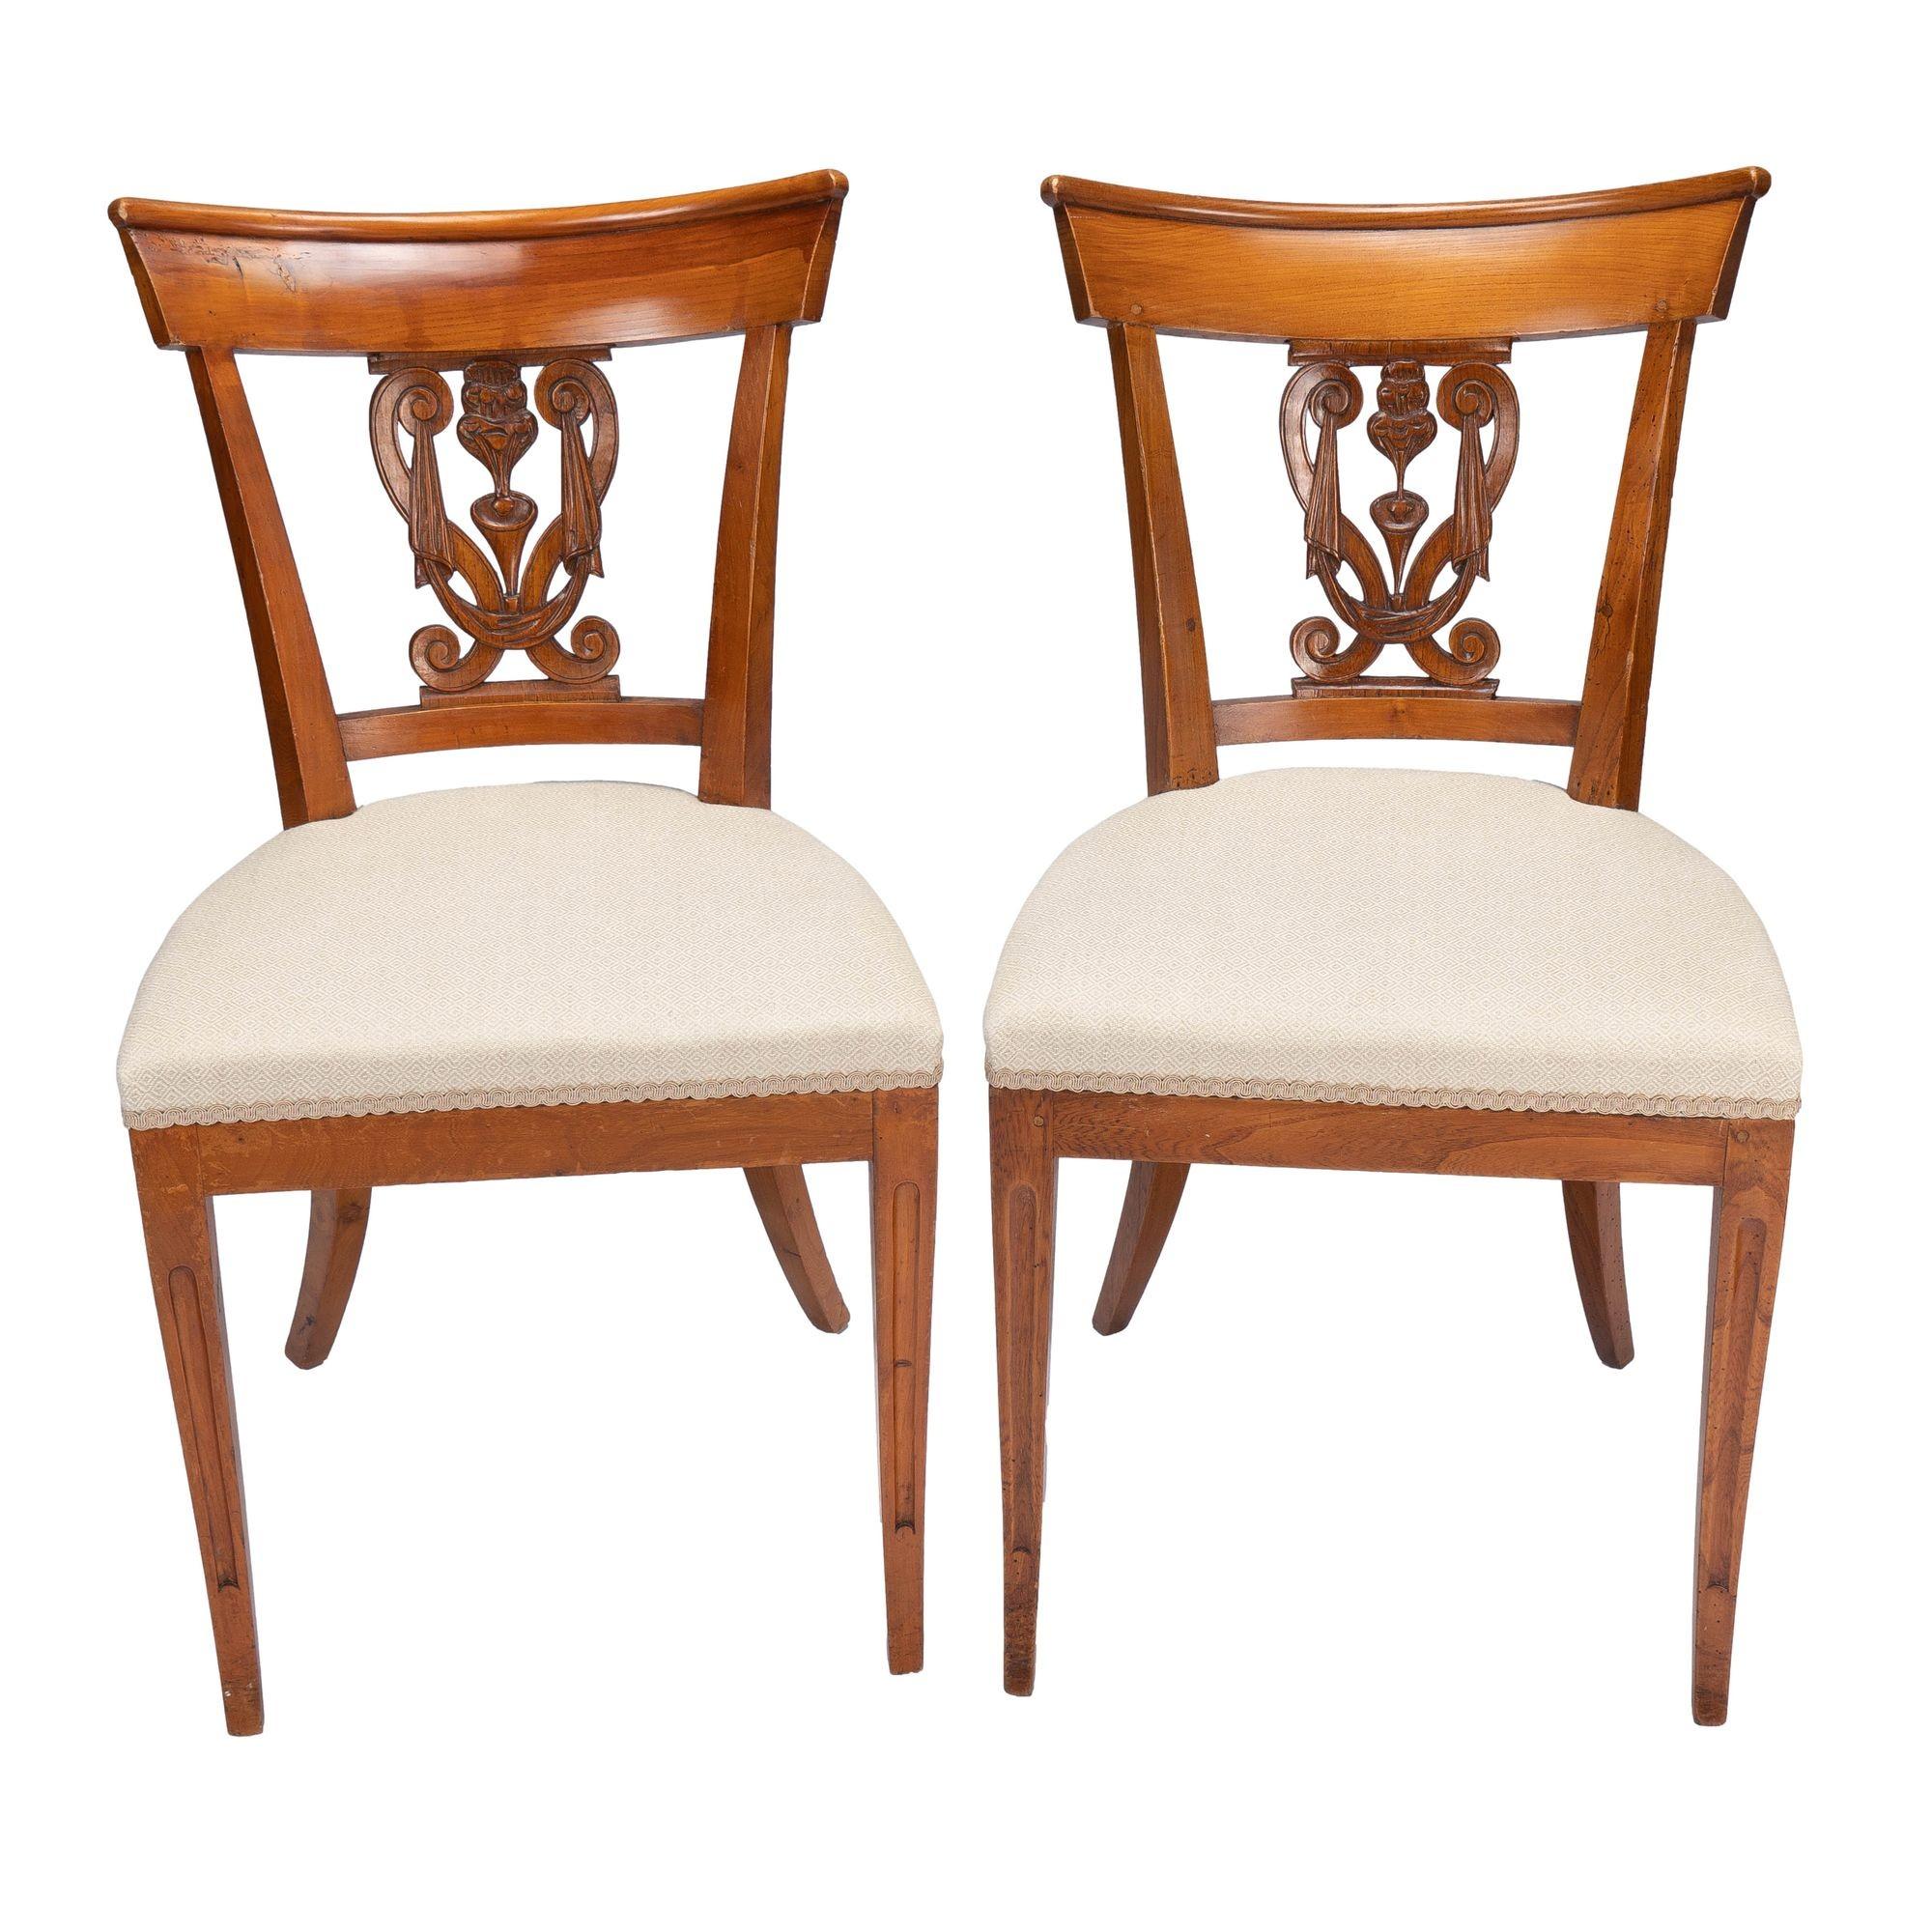 English Pair of French Neoclassic Upholstered Seat Side Chairs, c. 1795-1810 For Sale